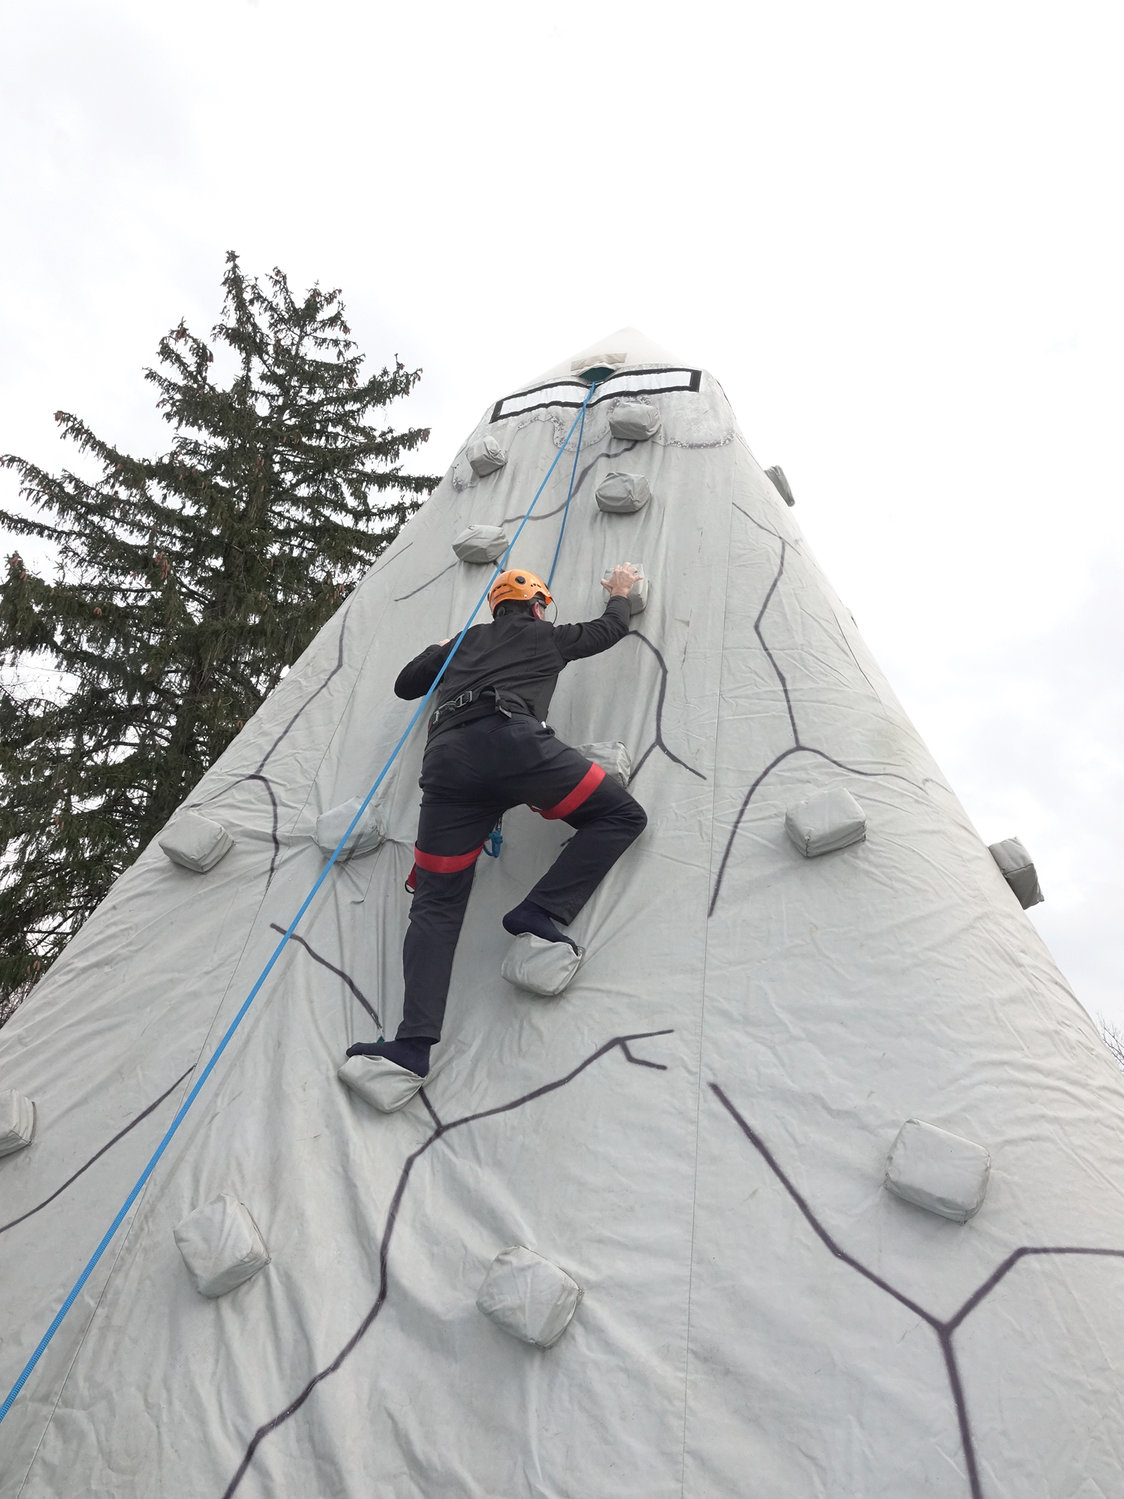 Father George Sears, archdiocesan director of vocations, climbs a rock wall after Mass at St. Joseph’s Day for Vocations held on the Feast of St. Joseph, March 19, at St. Joseph’s Seminary in Dunwoodie.